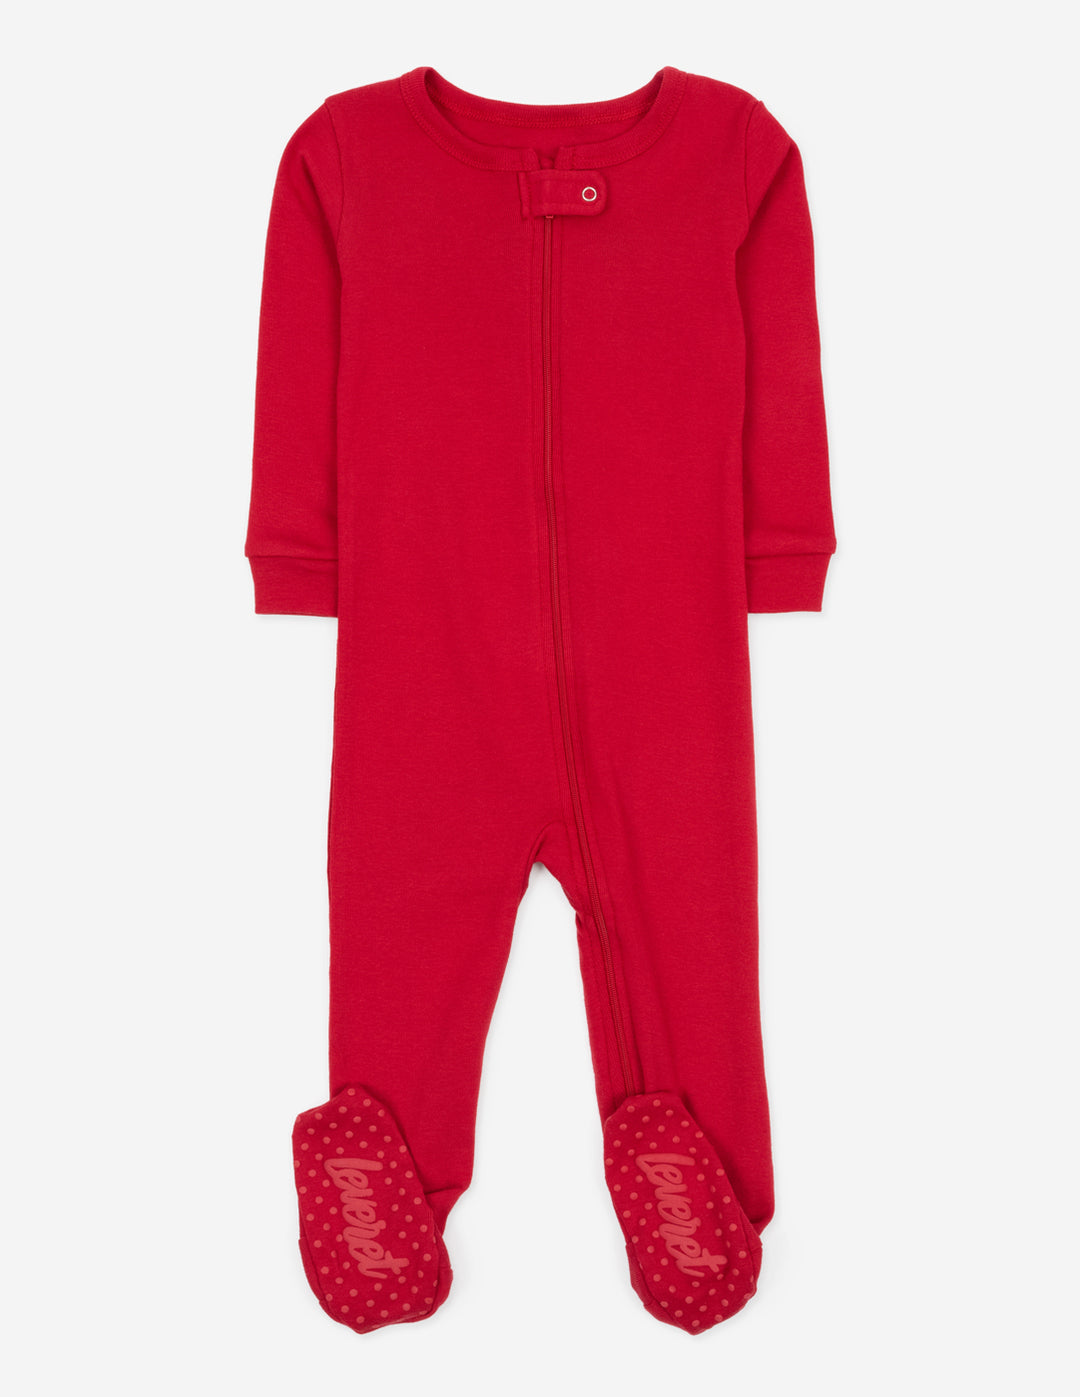 solid color red baby footed pajamas